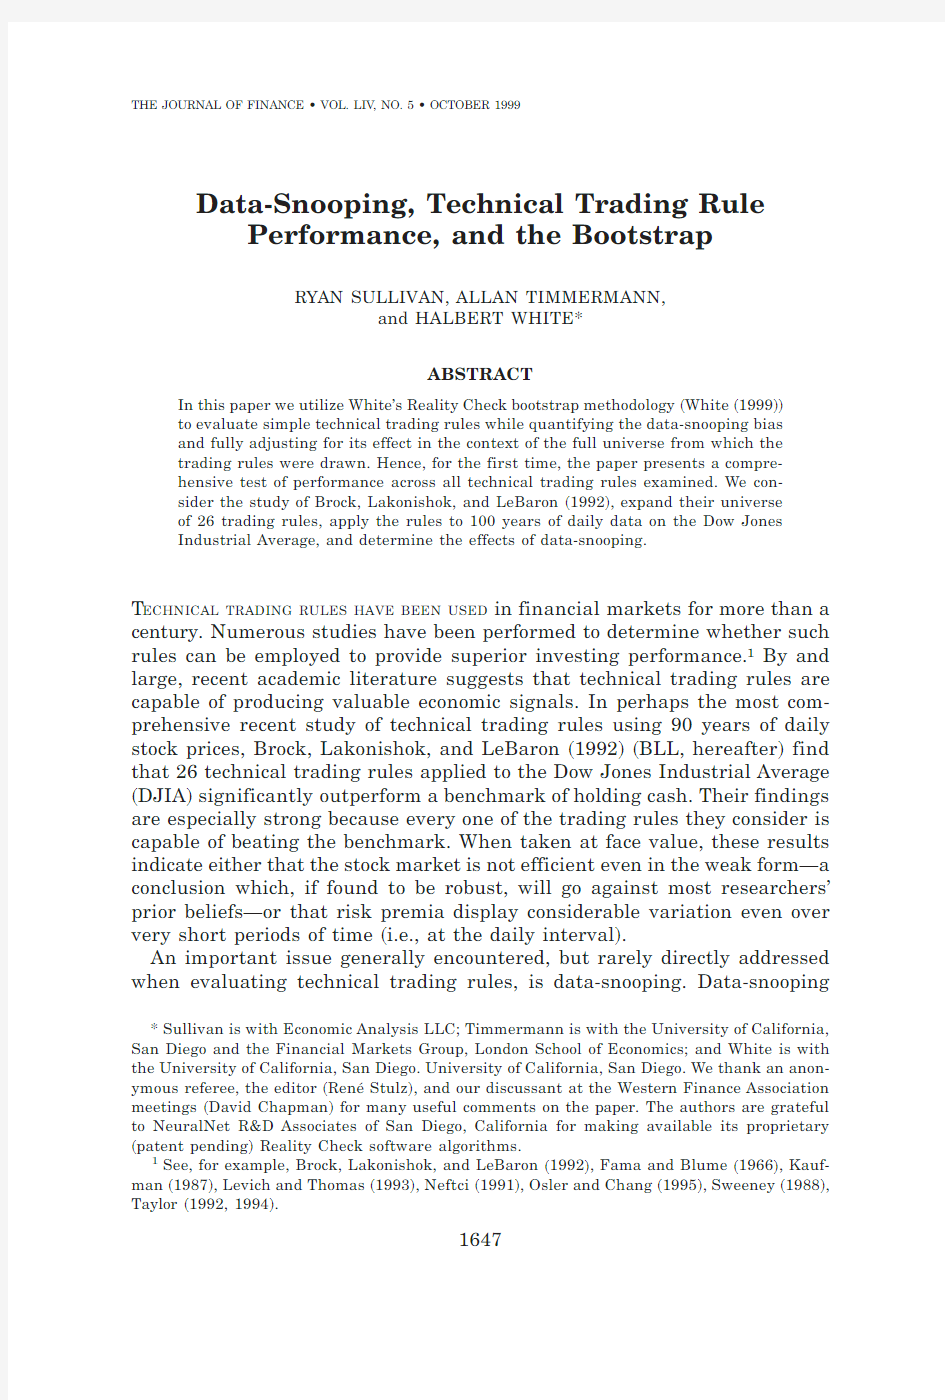 Data Snooping Technical Trading Rule Performance and the Bootstrap(Journal of Finance)